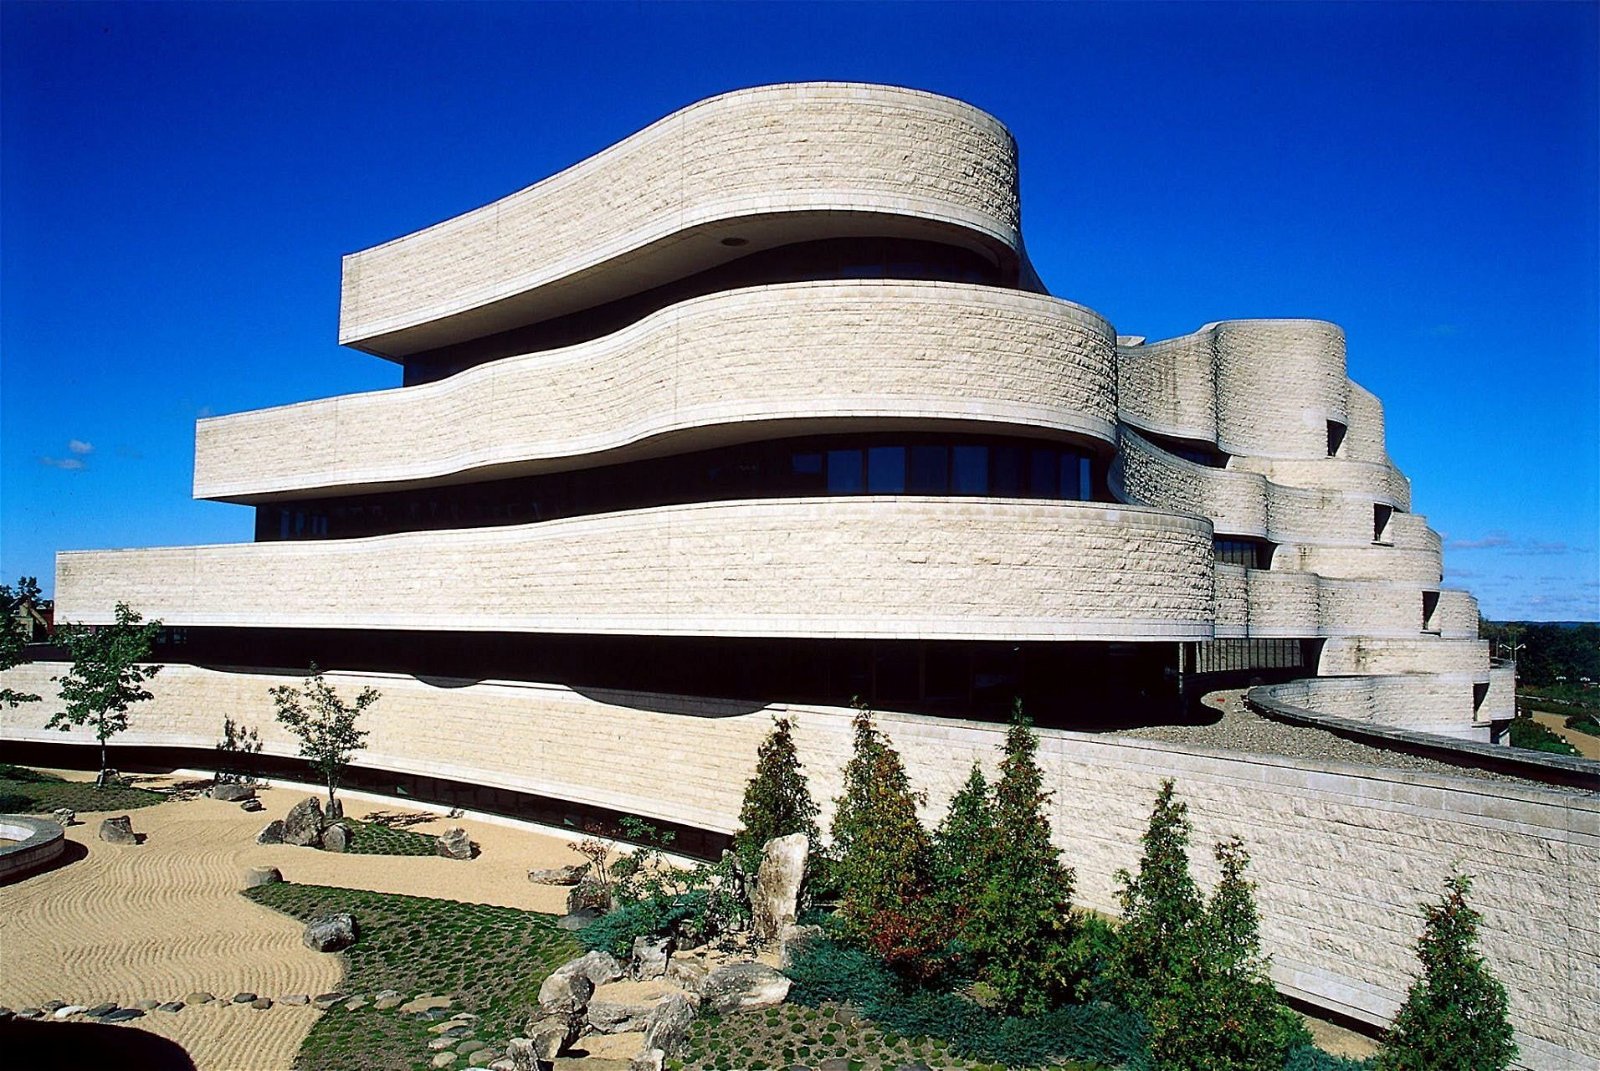 2. Canadian Museum of History